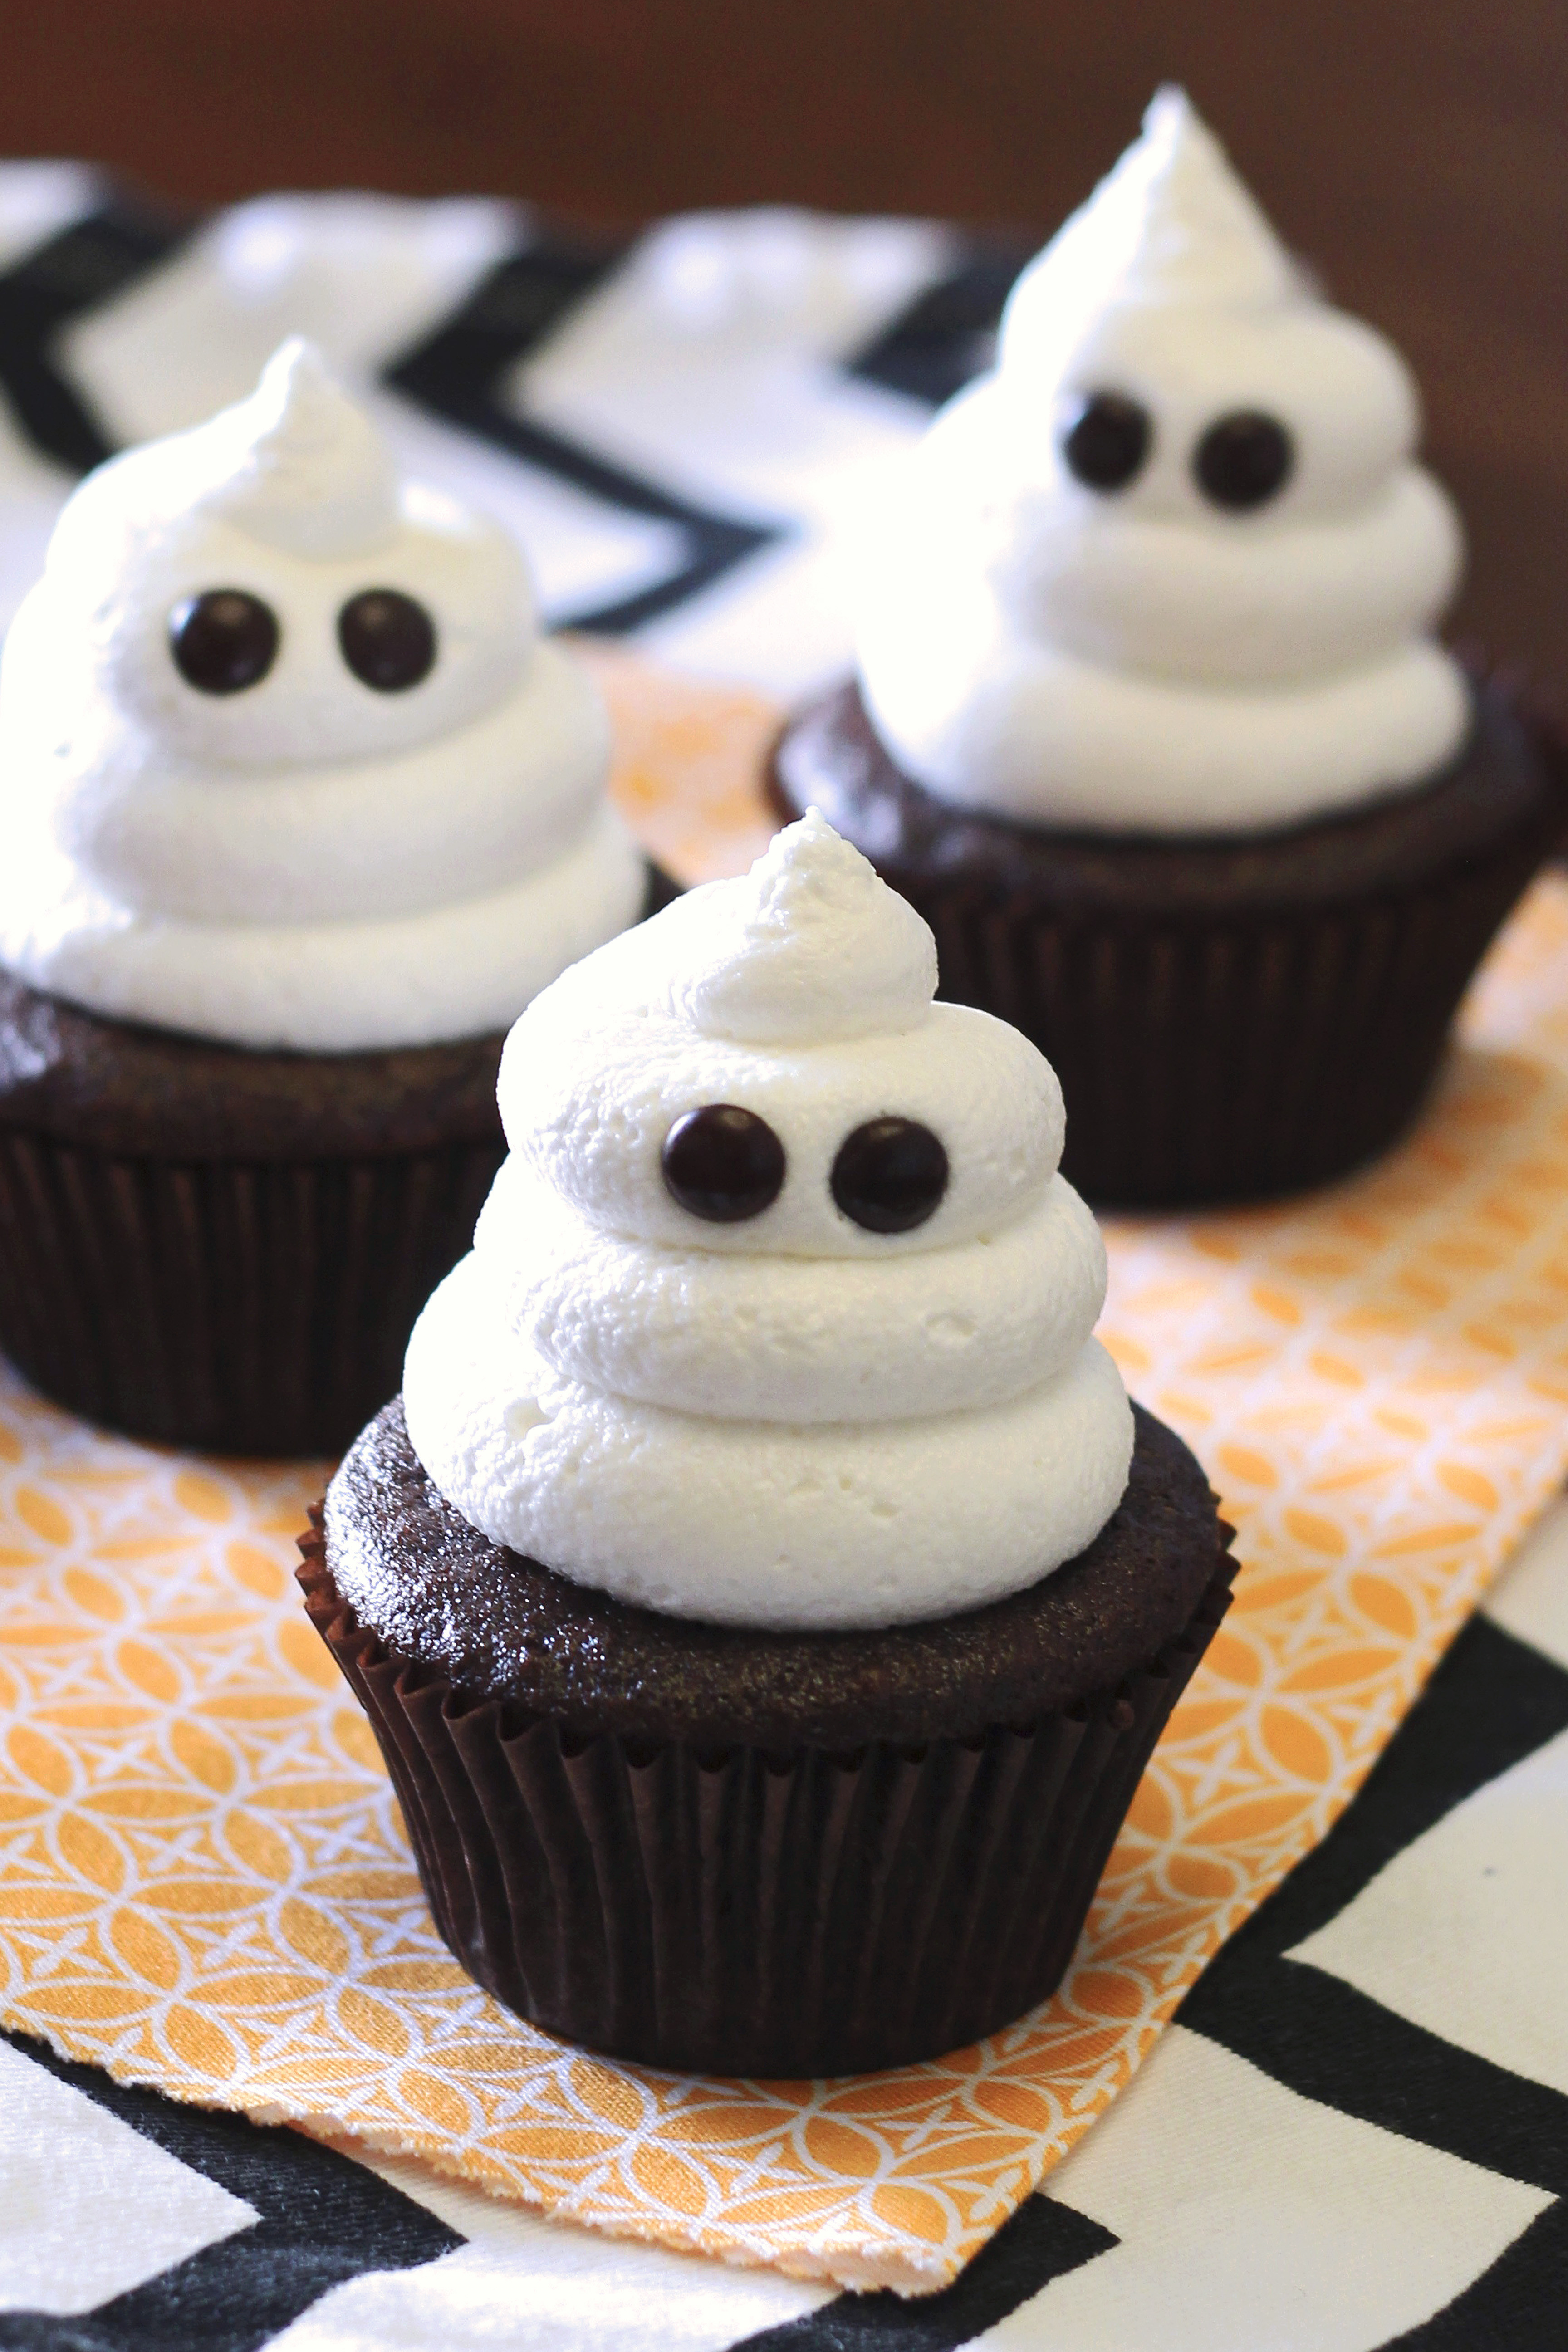 Picture Of Halloween Cupcakes
 gluten free vegan ghost cupcakes Sarah Bakes Gluten Free